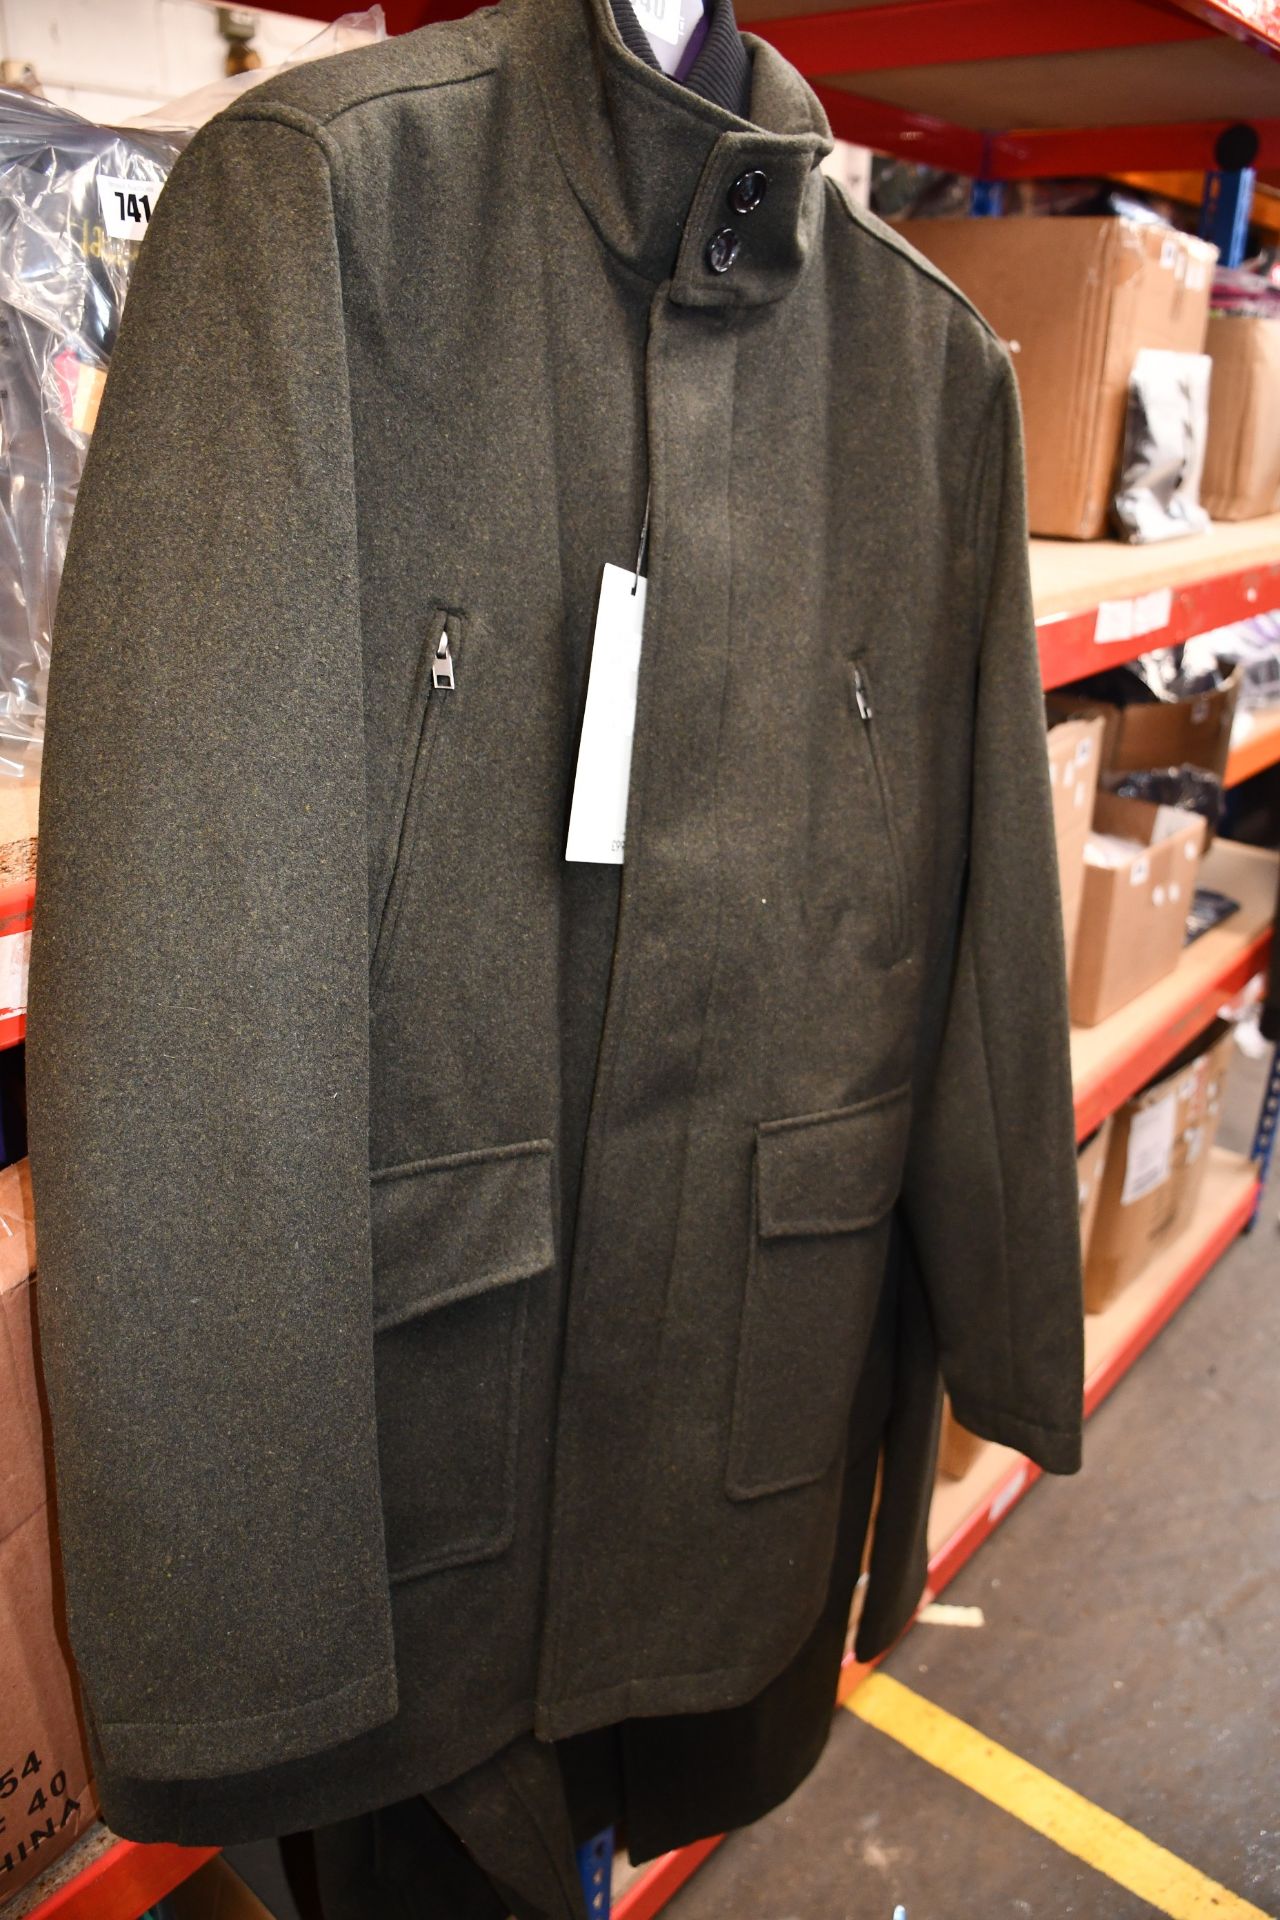 Two as new Next wool coats (1x M, 1 x XL - RRP £99 each).